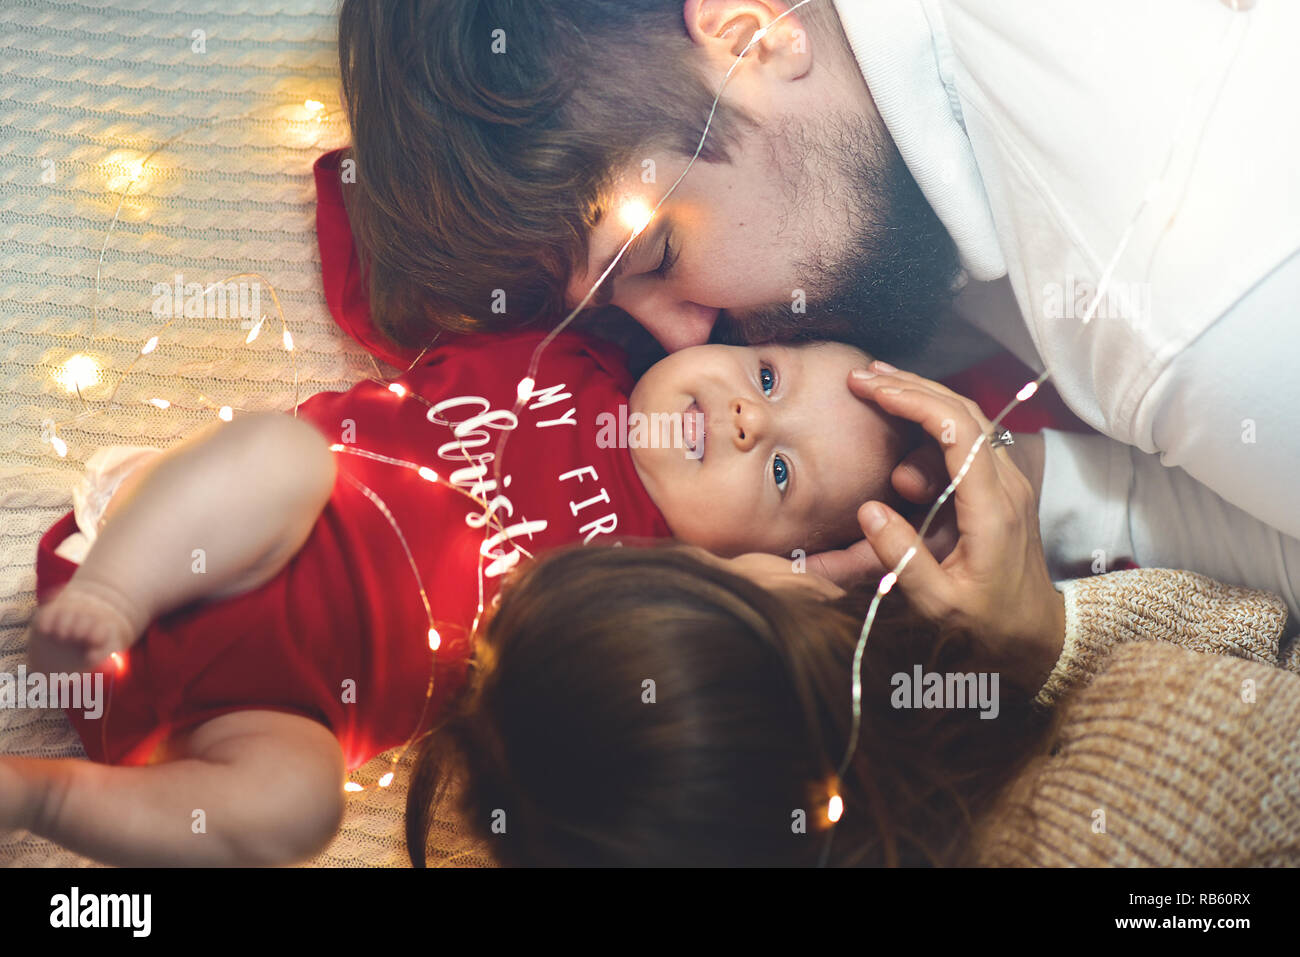 Top view. Mother and Father Kisses Baby in Bed. Little Newborn Child in White Bed. Parenthood Concepts. Love and Happiness. Taking Care of New Life. Stock Photo